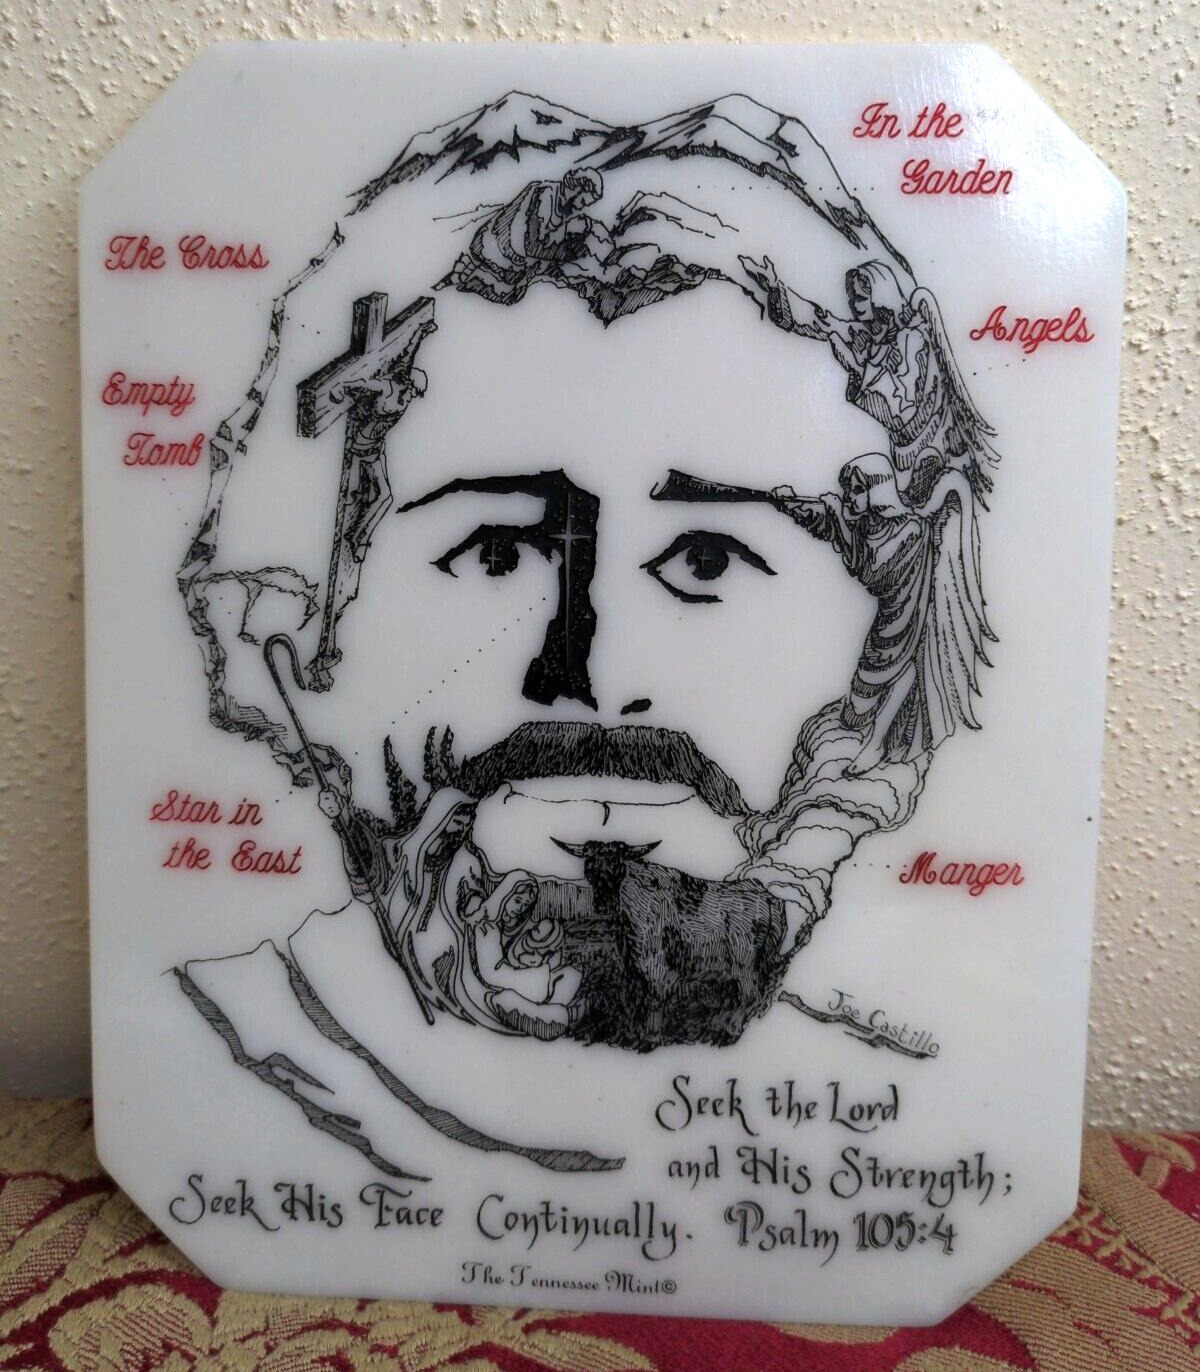 The Face of Christ By Joe Castillo Jesus Savior The Tennessee Mint Psalm 105:4